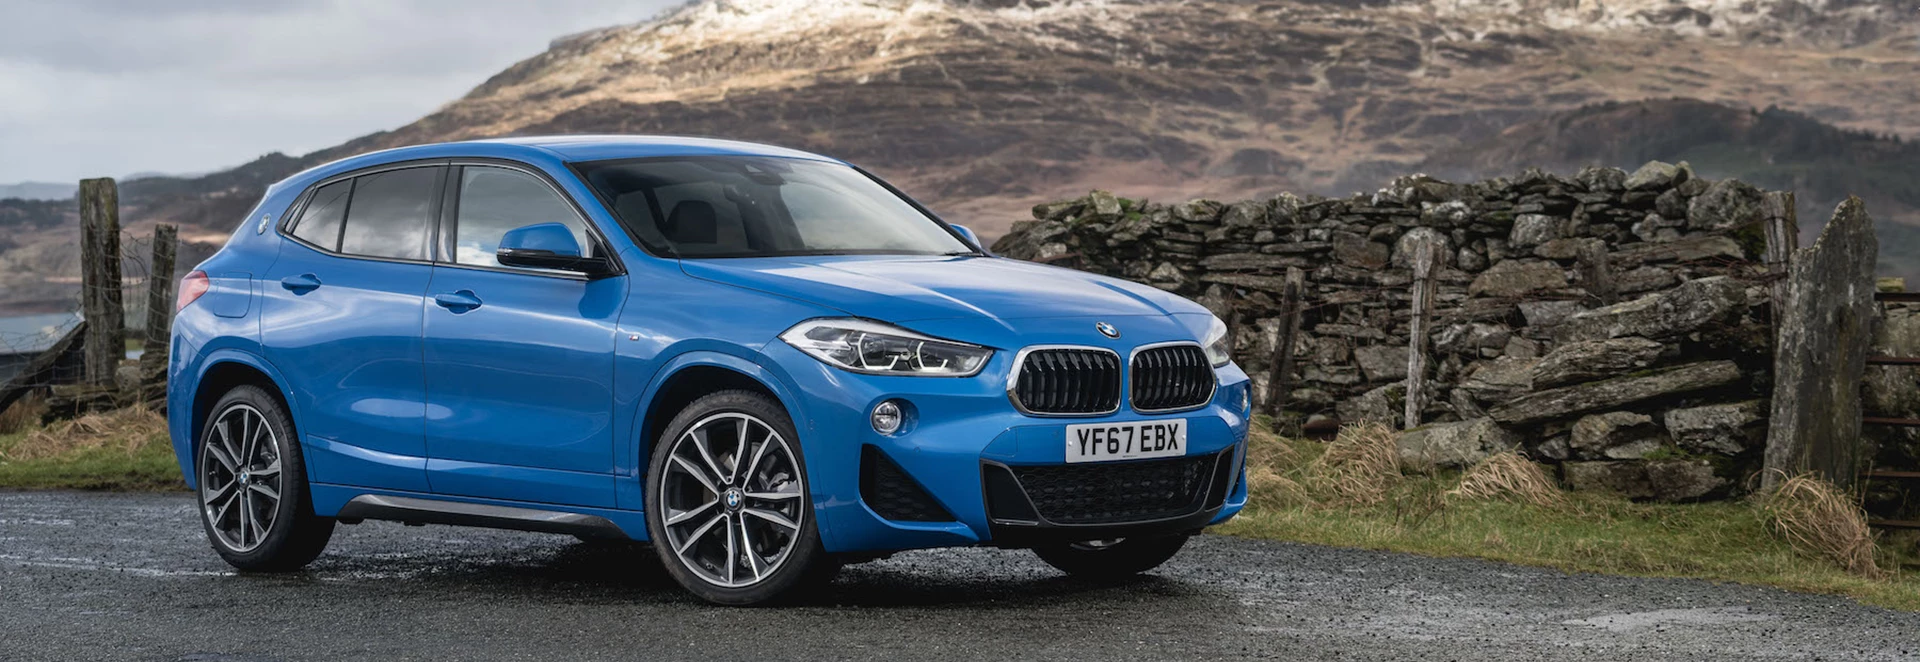 BMW's success continues as sales increase again in July